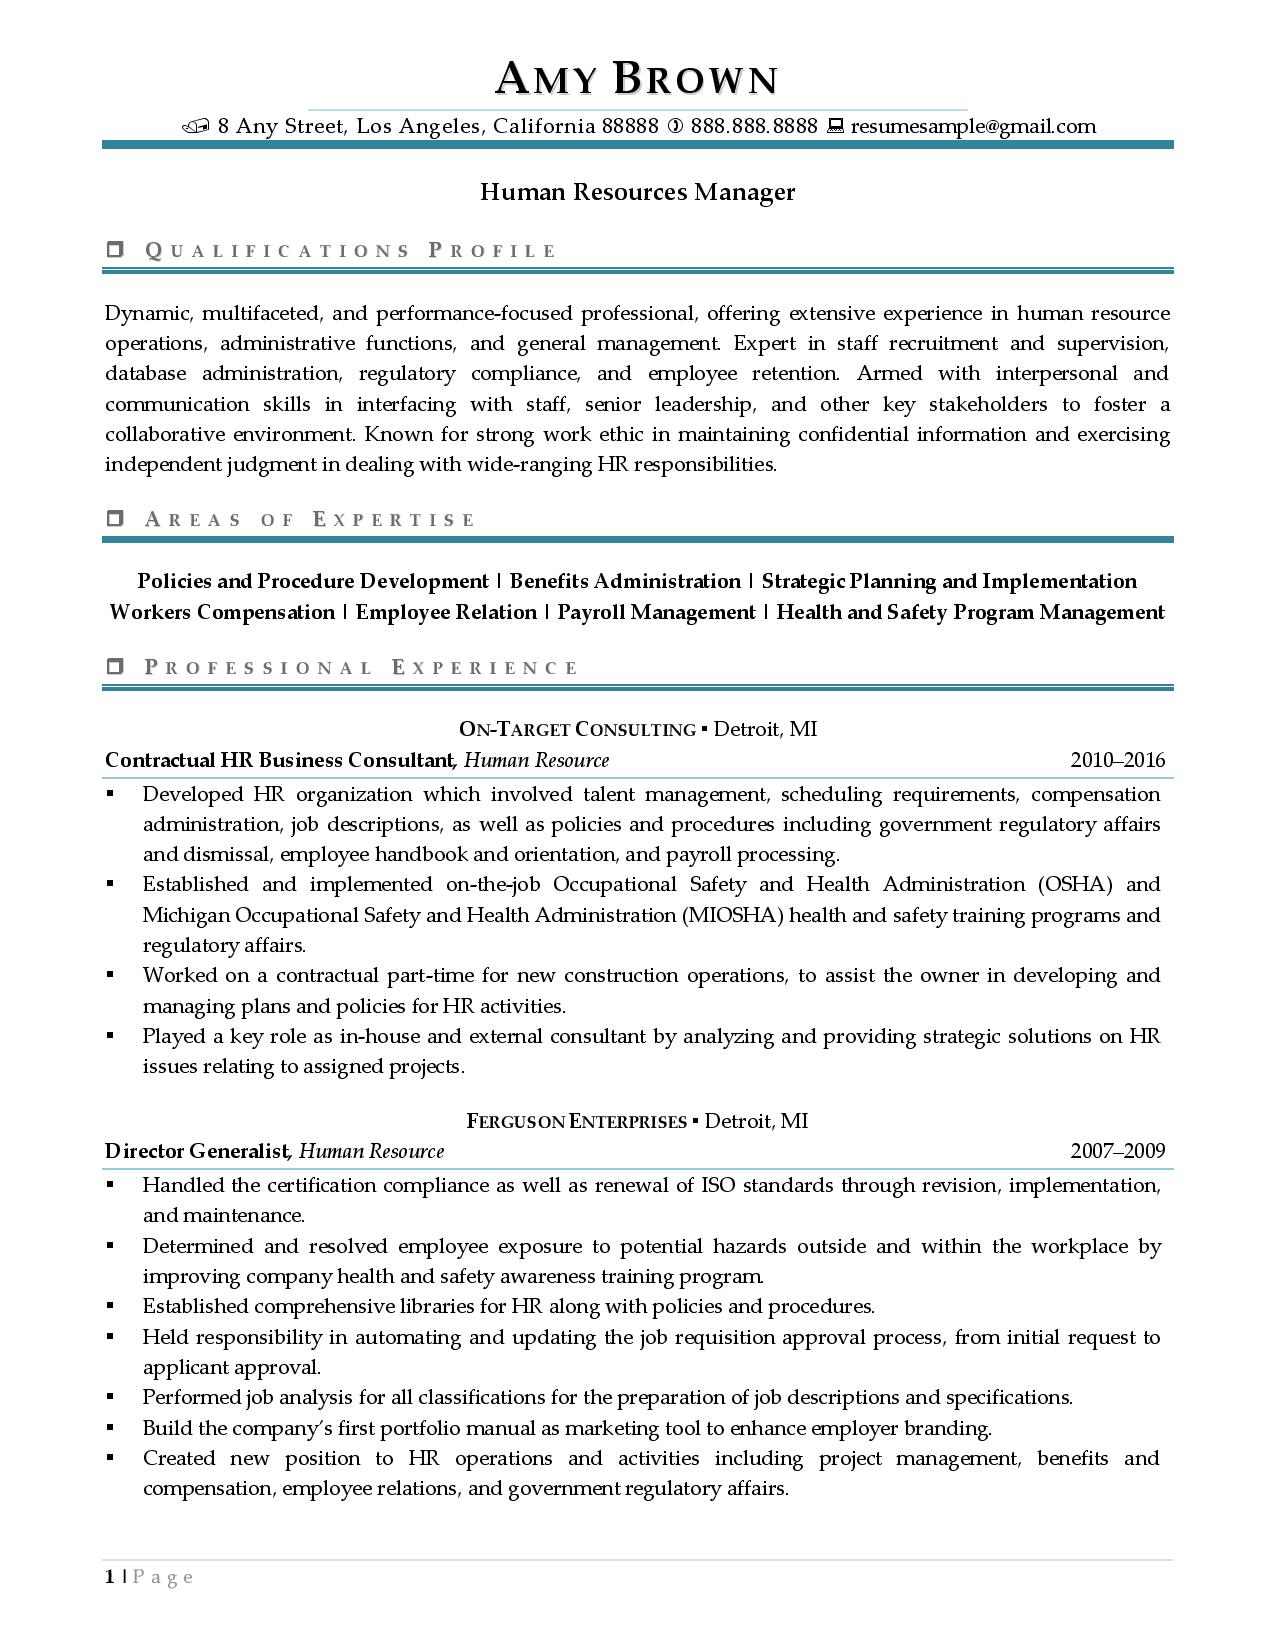 resume samples for human resources executive